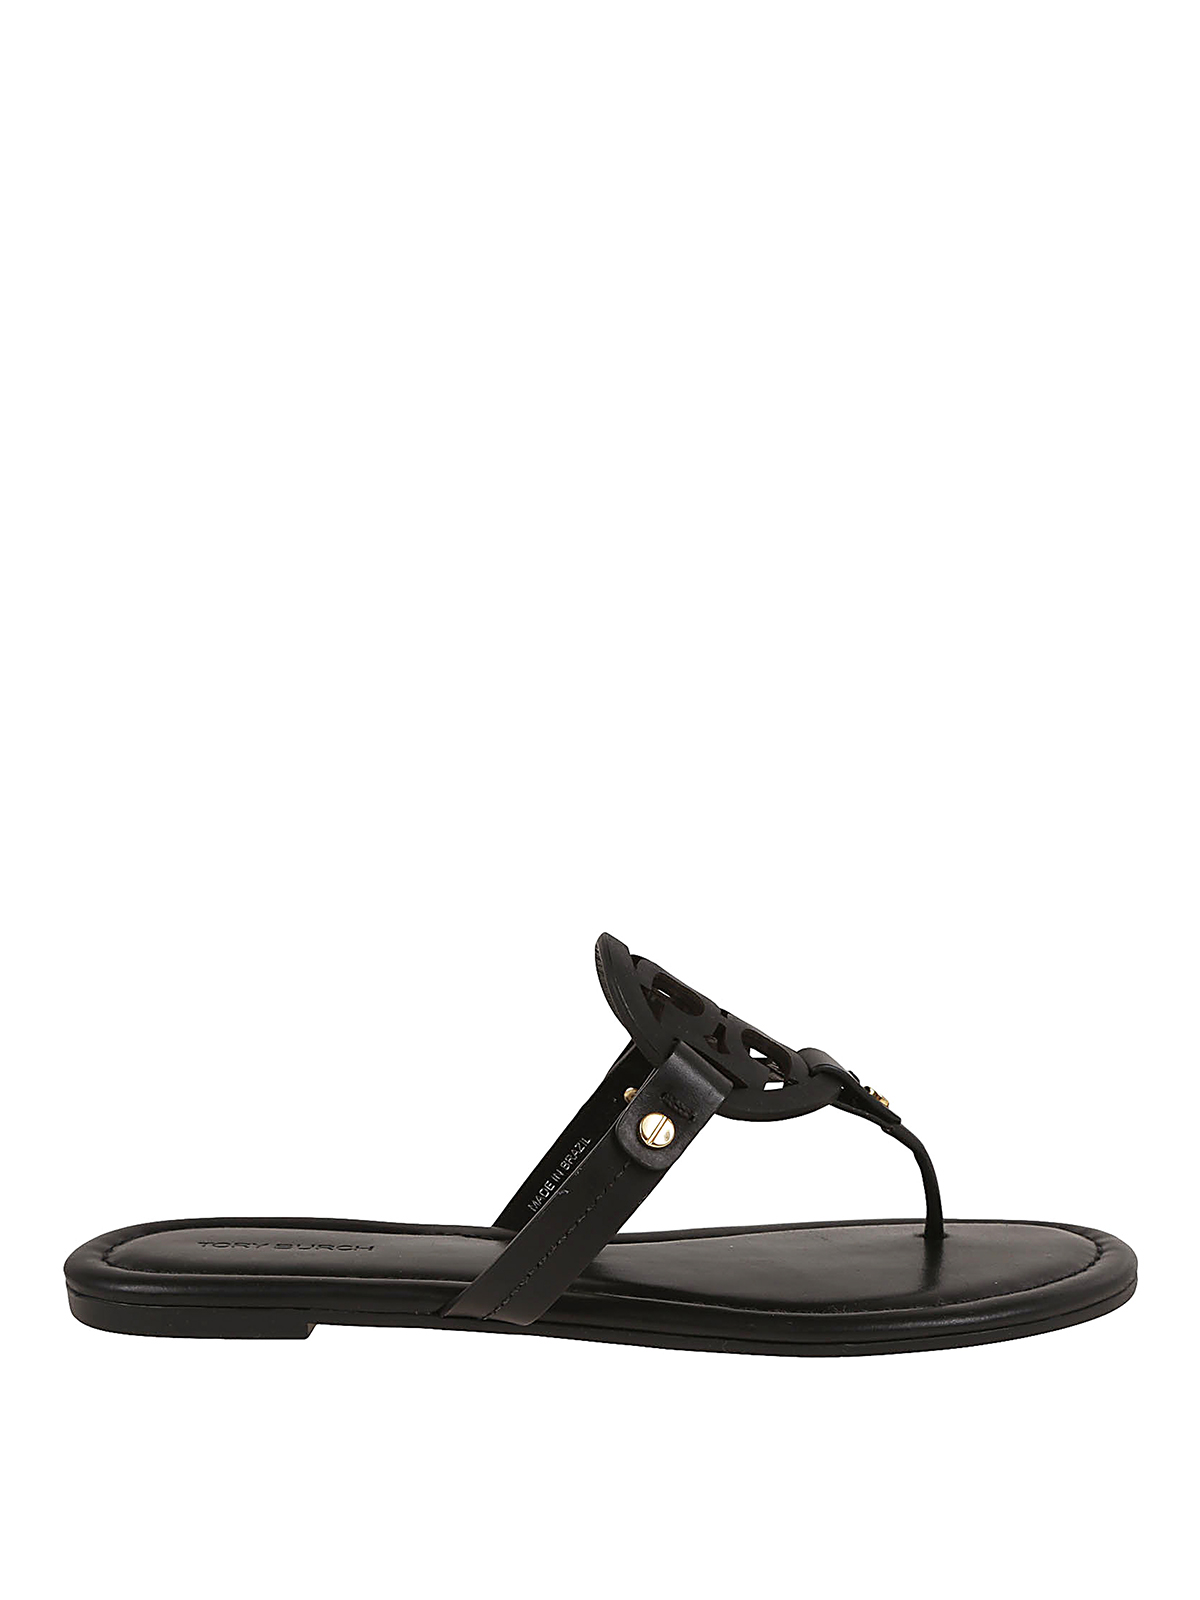 Sandals Tory Burch - Leather sandals - 50008694001 | thebs.com [ikrix.com]